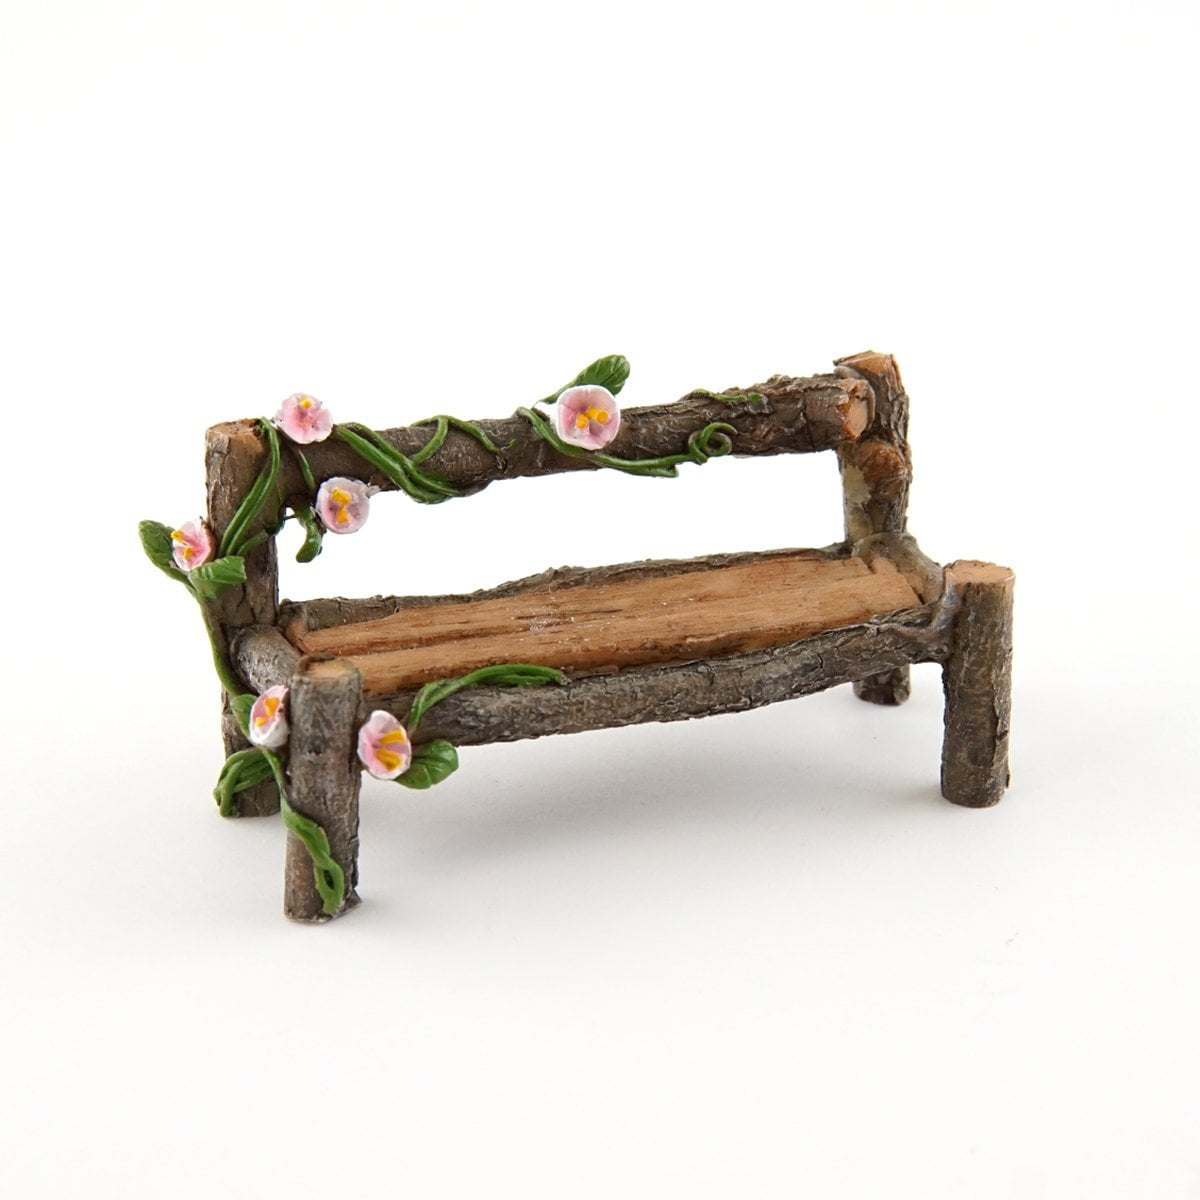 Details about   Miniature Wooden Bench 